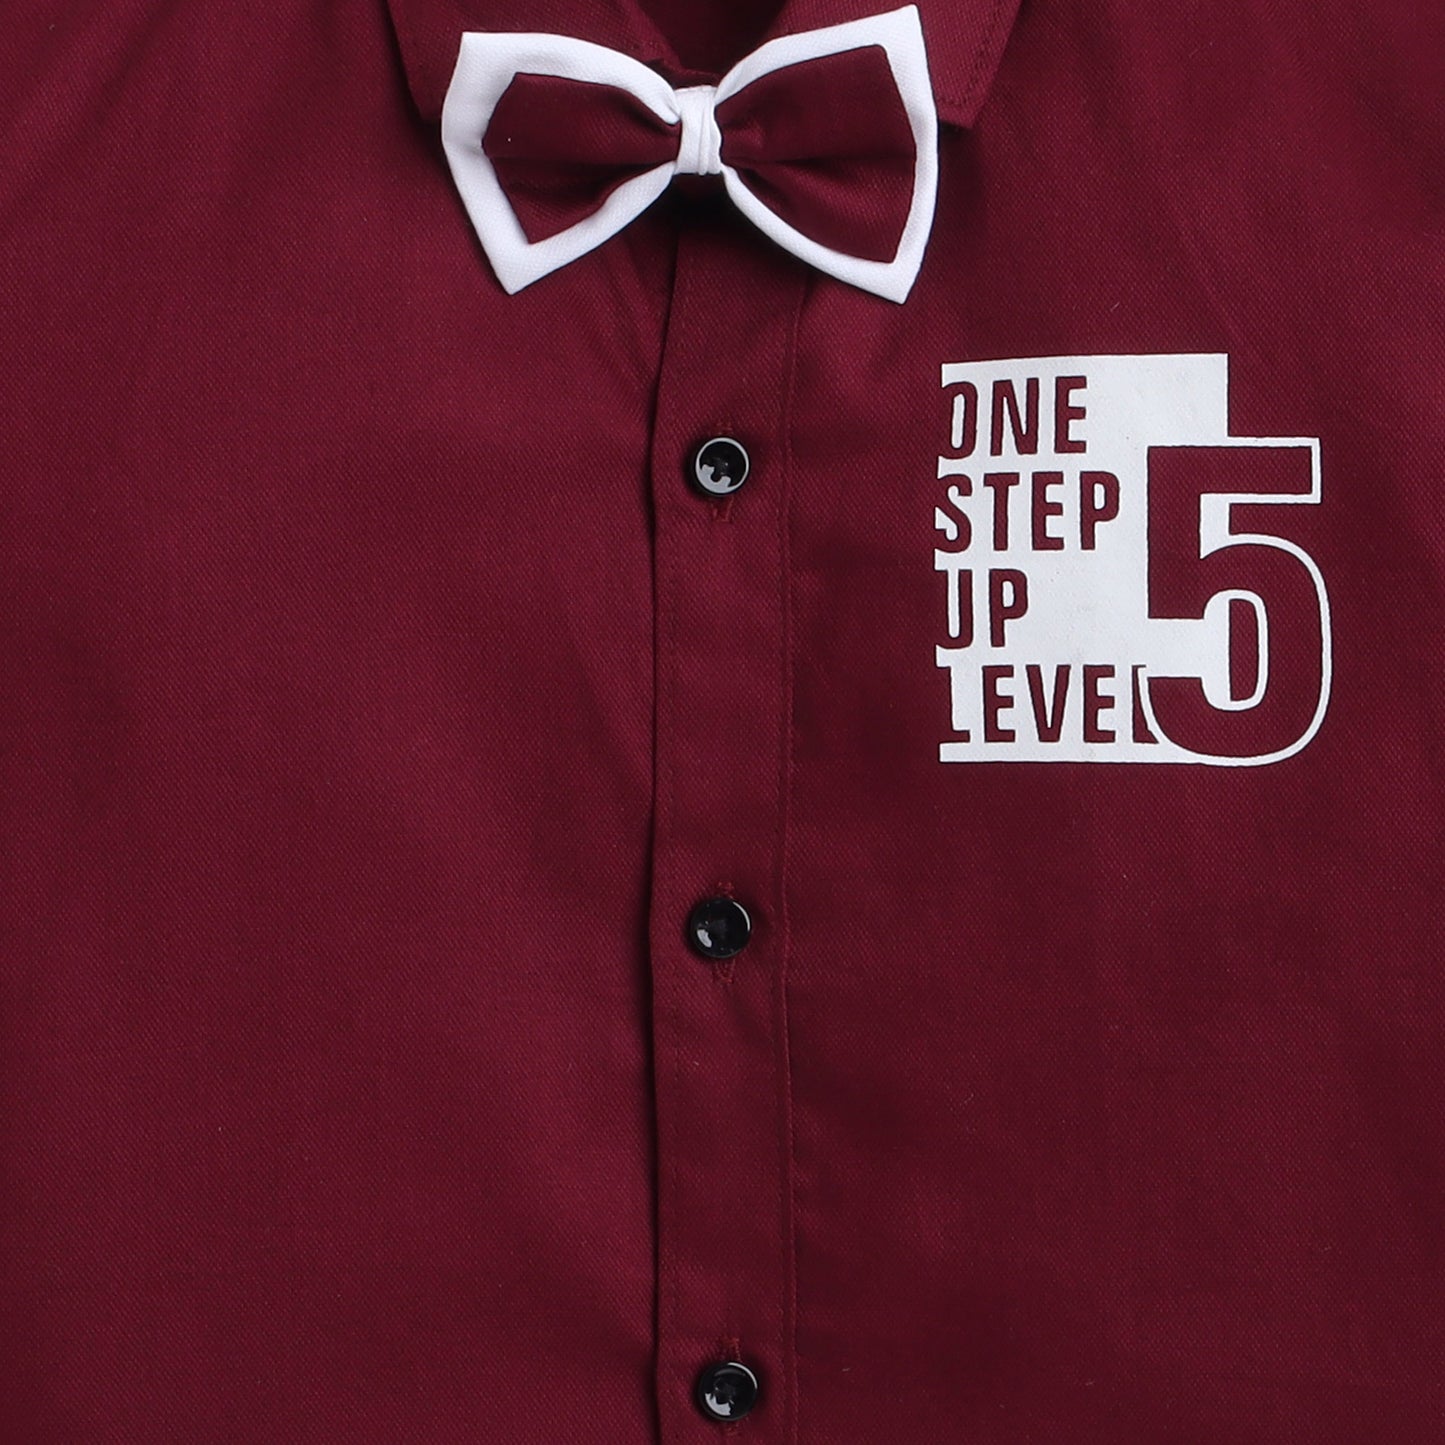  Polka Tots one step five design full sleeve shirt with bow tie - Maroon